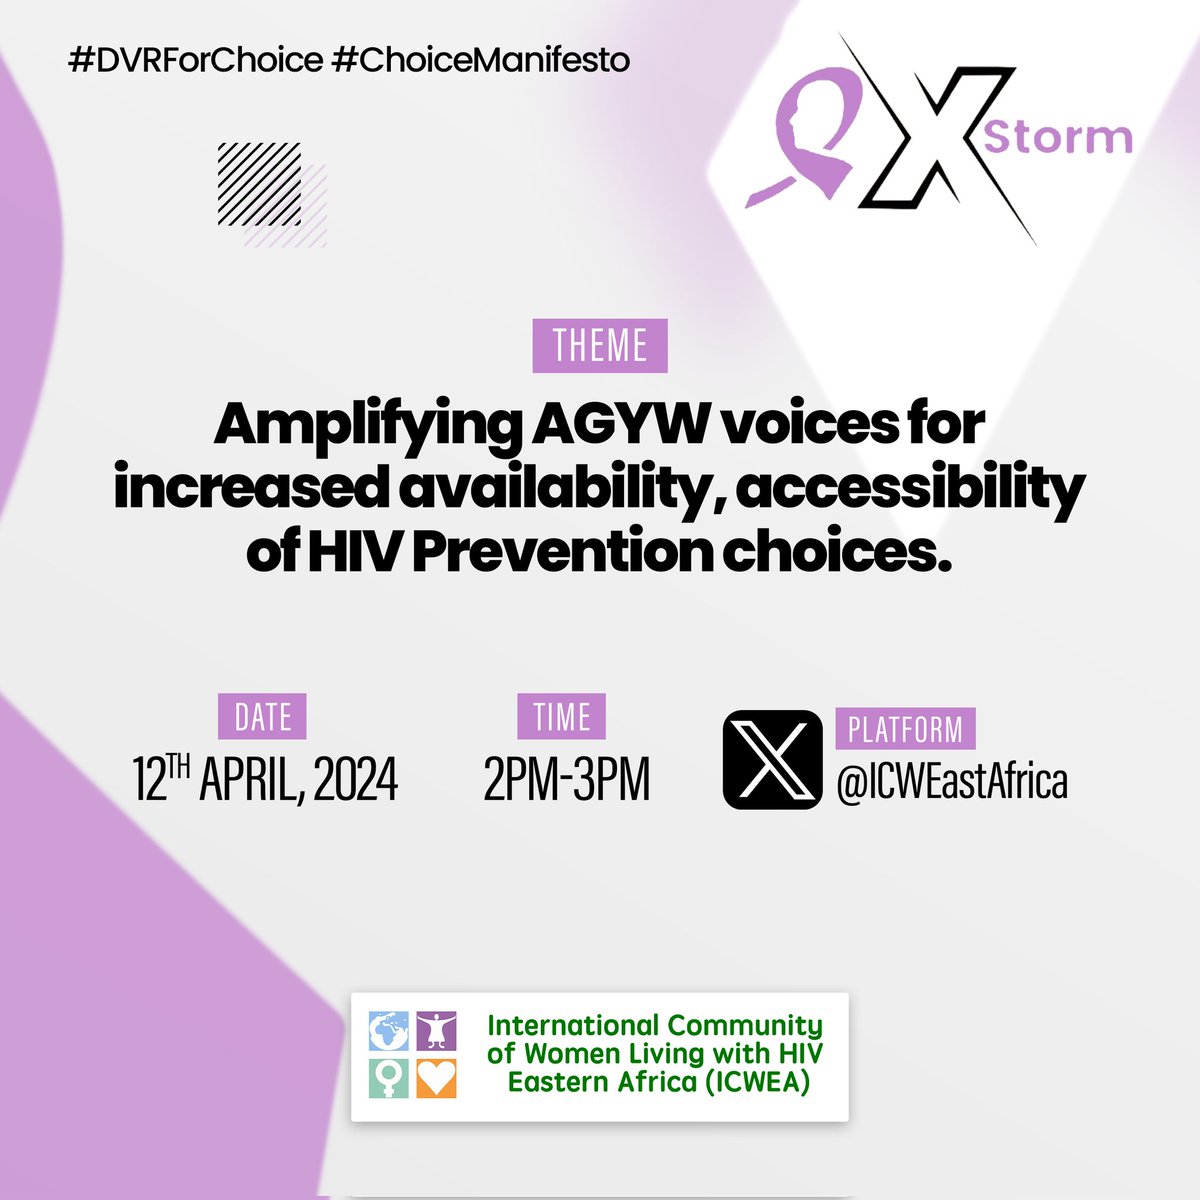 Dear Sisters it's a time for us to take precautions. With the availability and accessibility of HIV Preventive measures. @Aidsfonds @ICWEastAfrica @UNAIDS @GlobalFund @PEPFAR @aidscommission @HIVpxresearch @unwomenuganda #DVRForChoice #OptionsForHer #PreventionByChoice